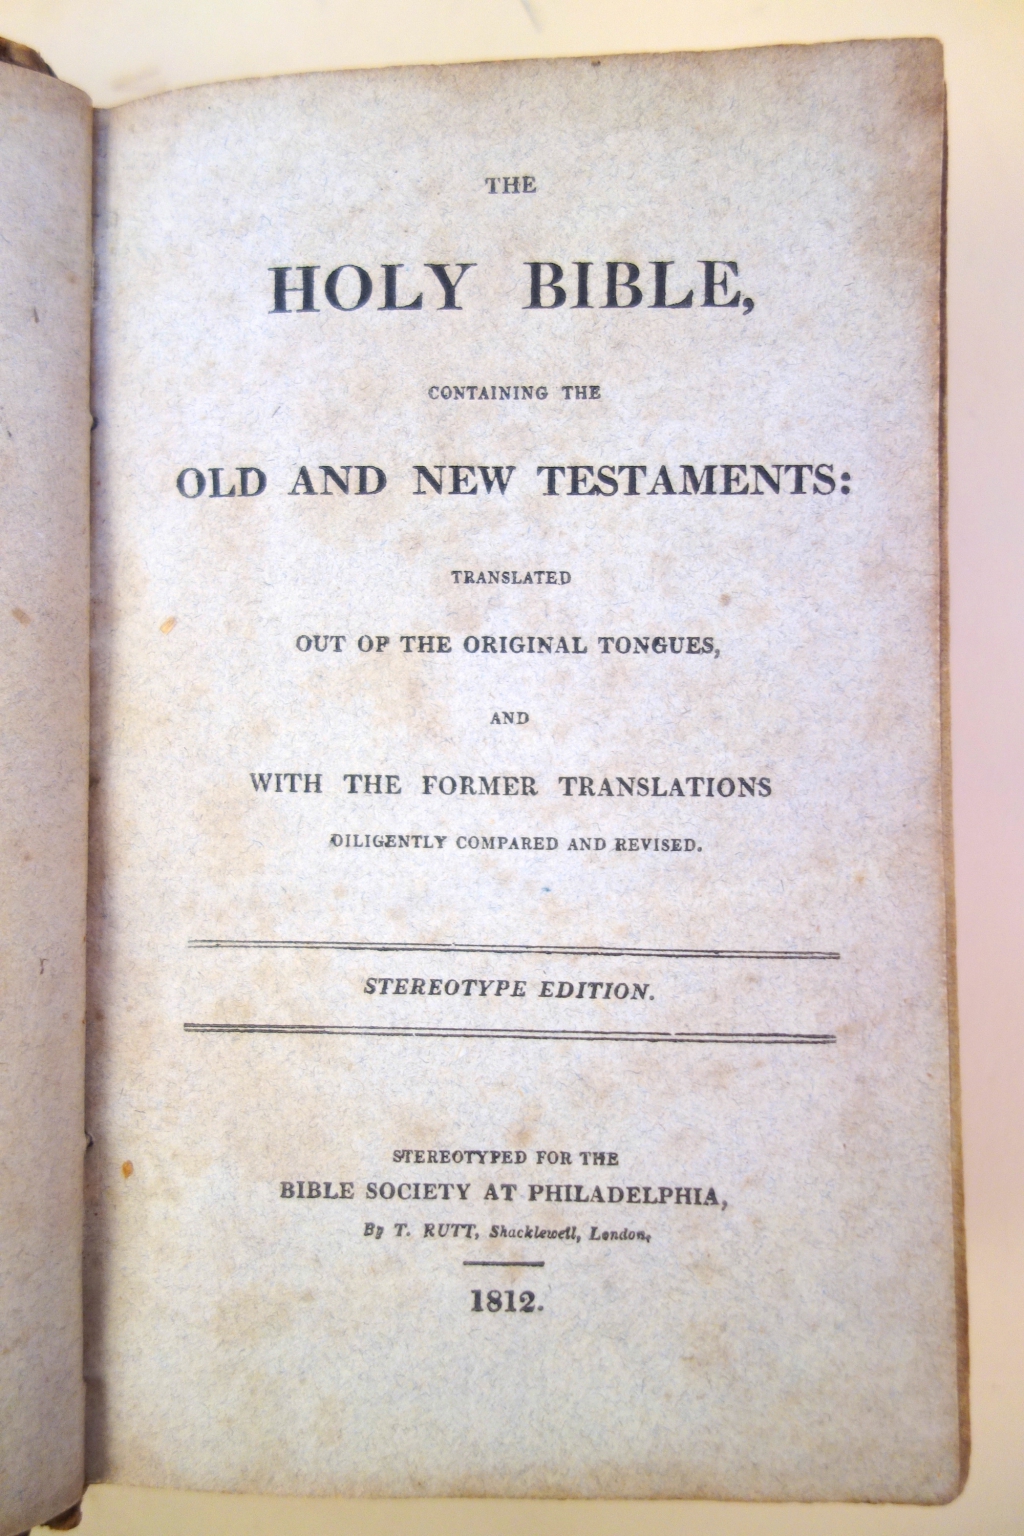 1st stereotyped Bible title page